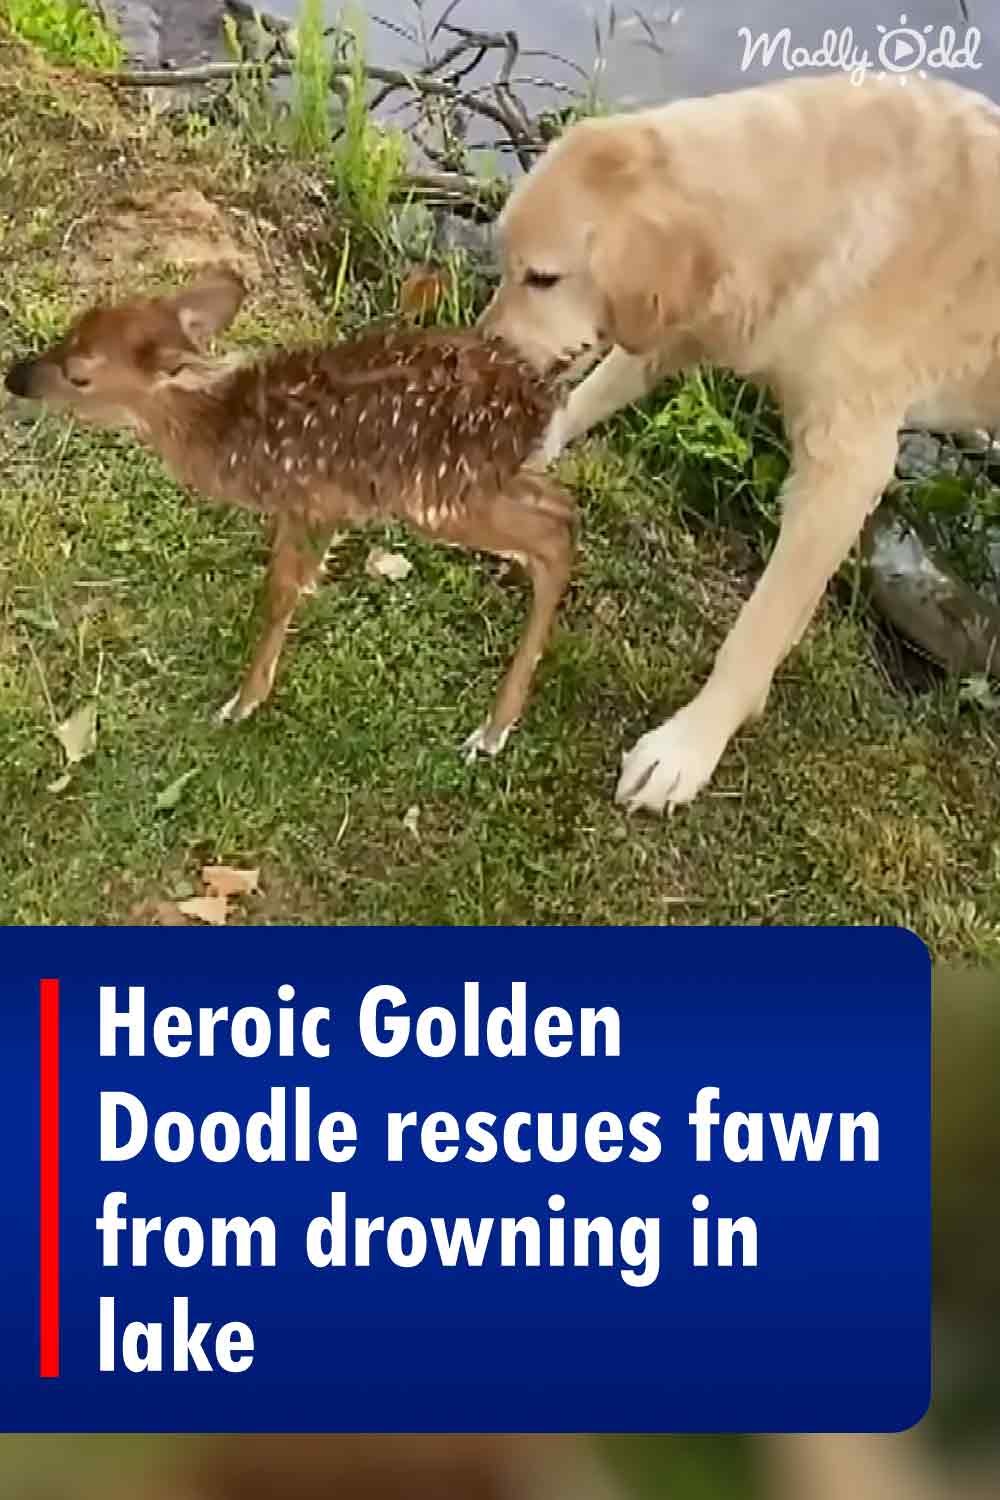 Heroic Golden Doodle rescues fawn from drowning in lake